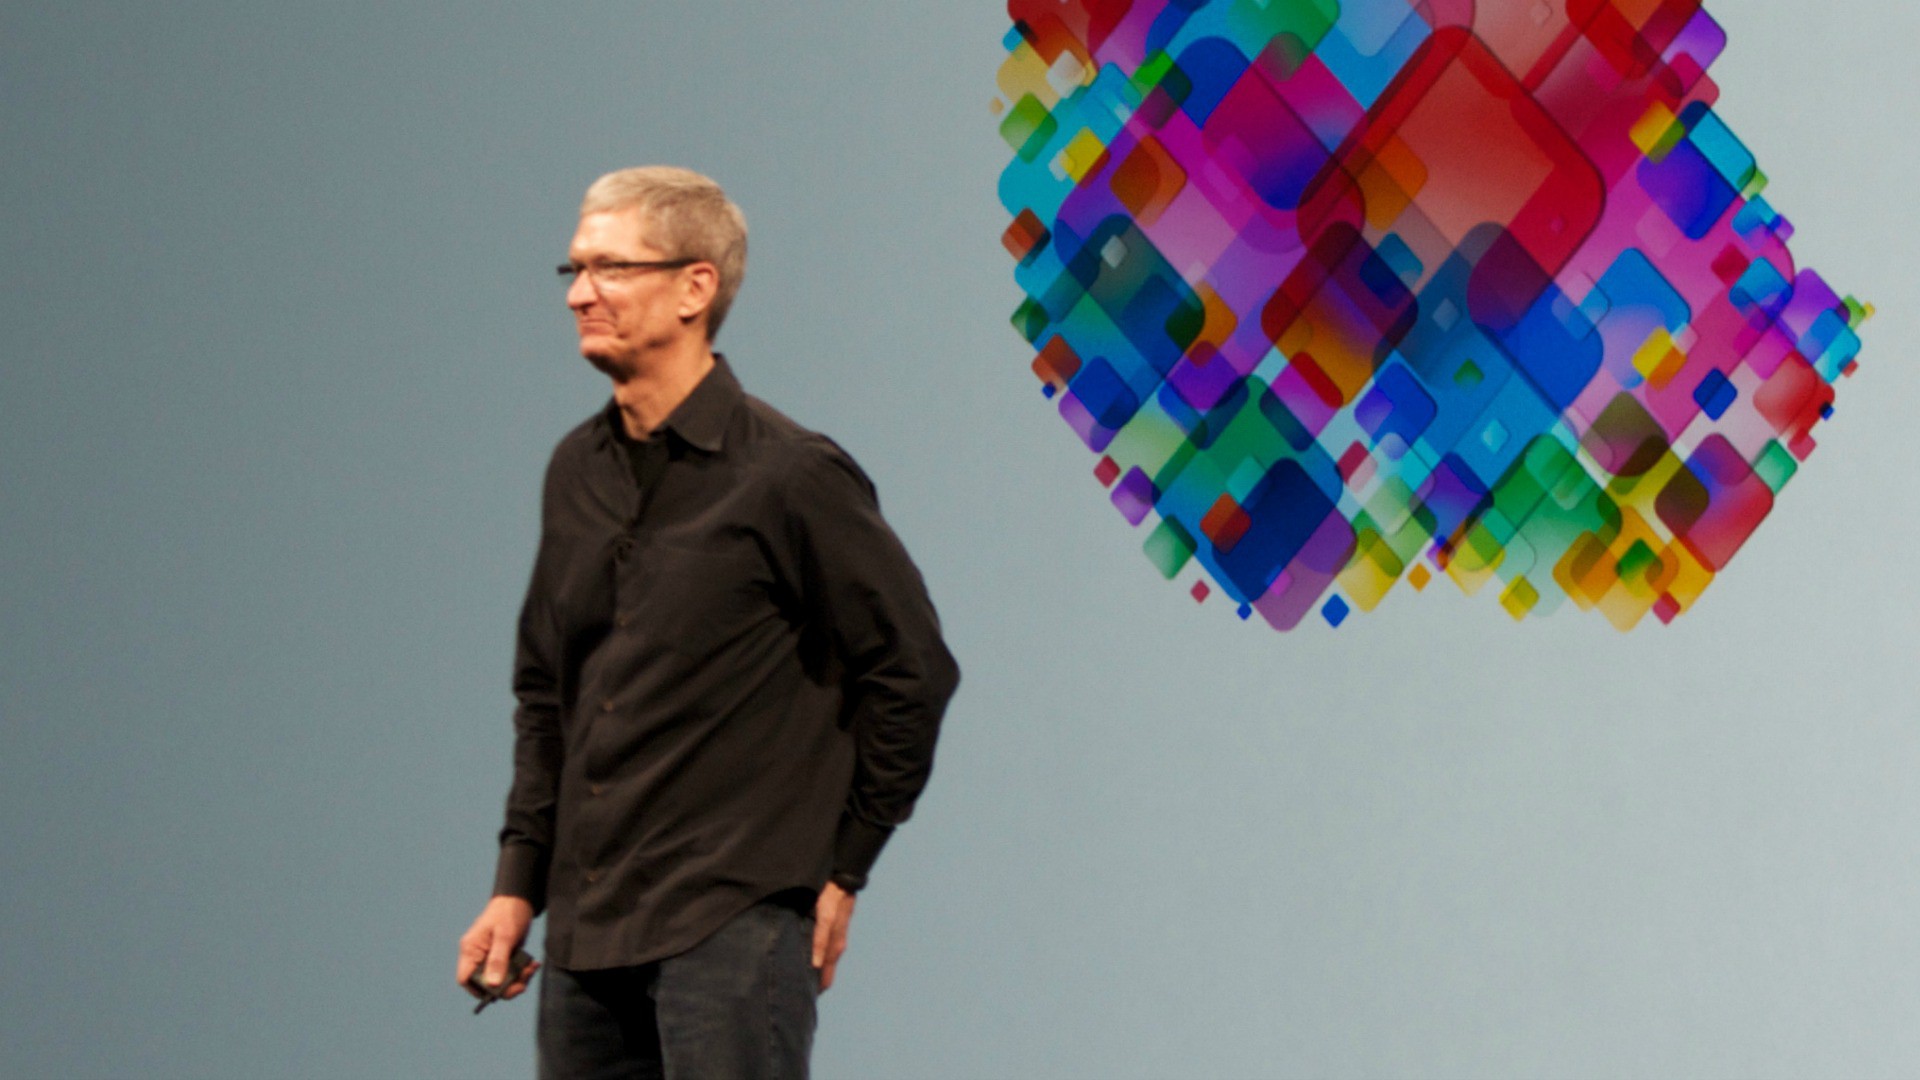 Tim Cook, le pdg d'Apple. (Photo: Flickr/Mike Deerkoski/CC BY 2.0)